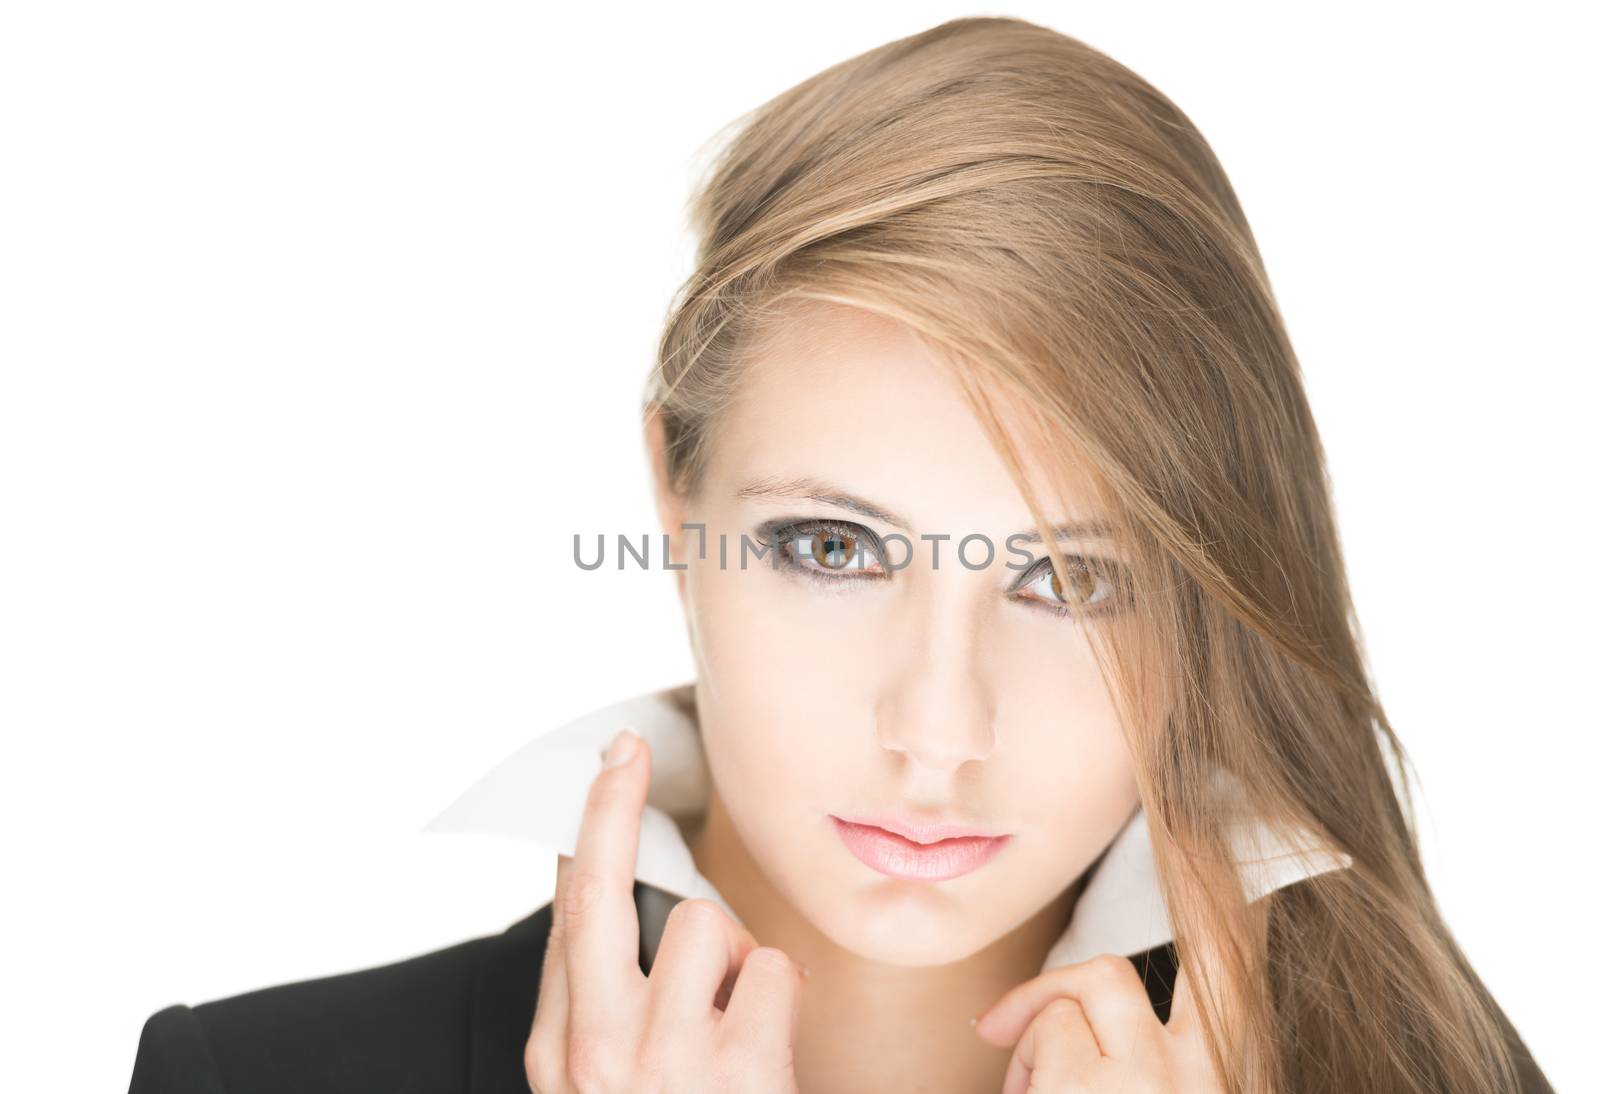 Portrait of stylish beautiful girl with long hair and bright make-up isolated on white background. Young business woman in black jacket and white blouse with raised collar looking serious and sexy.